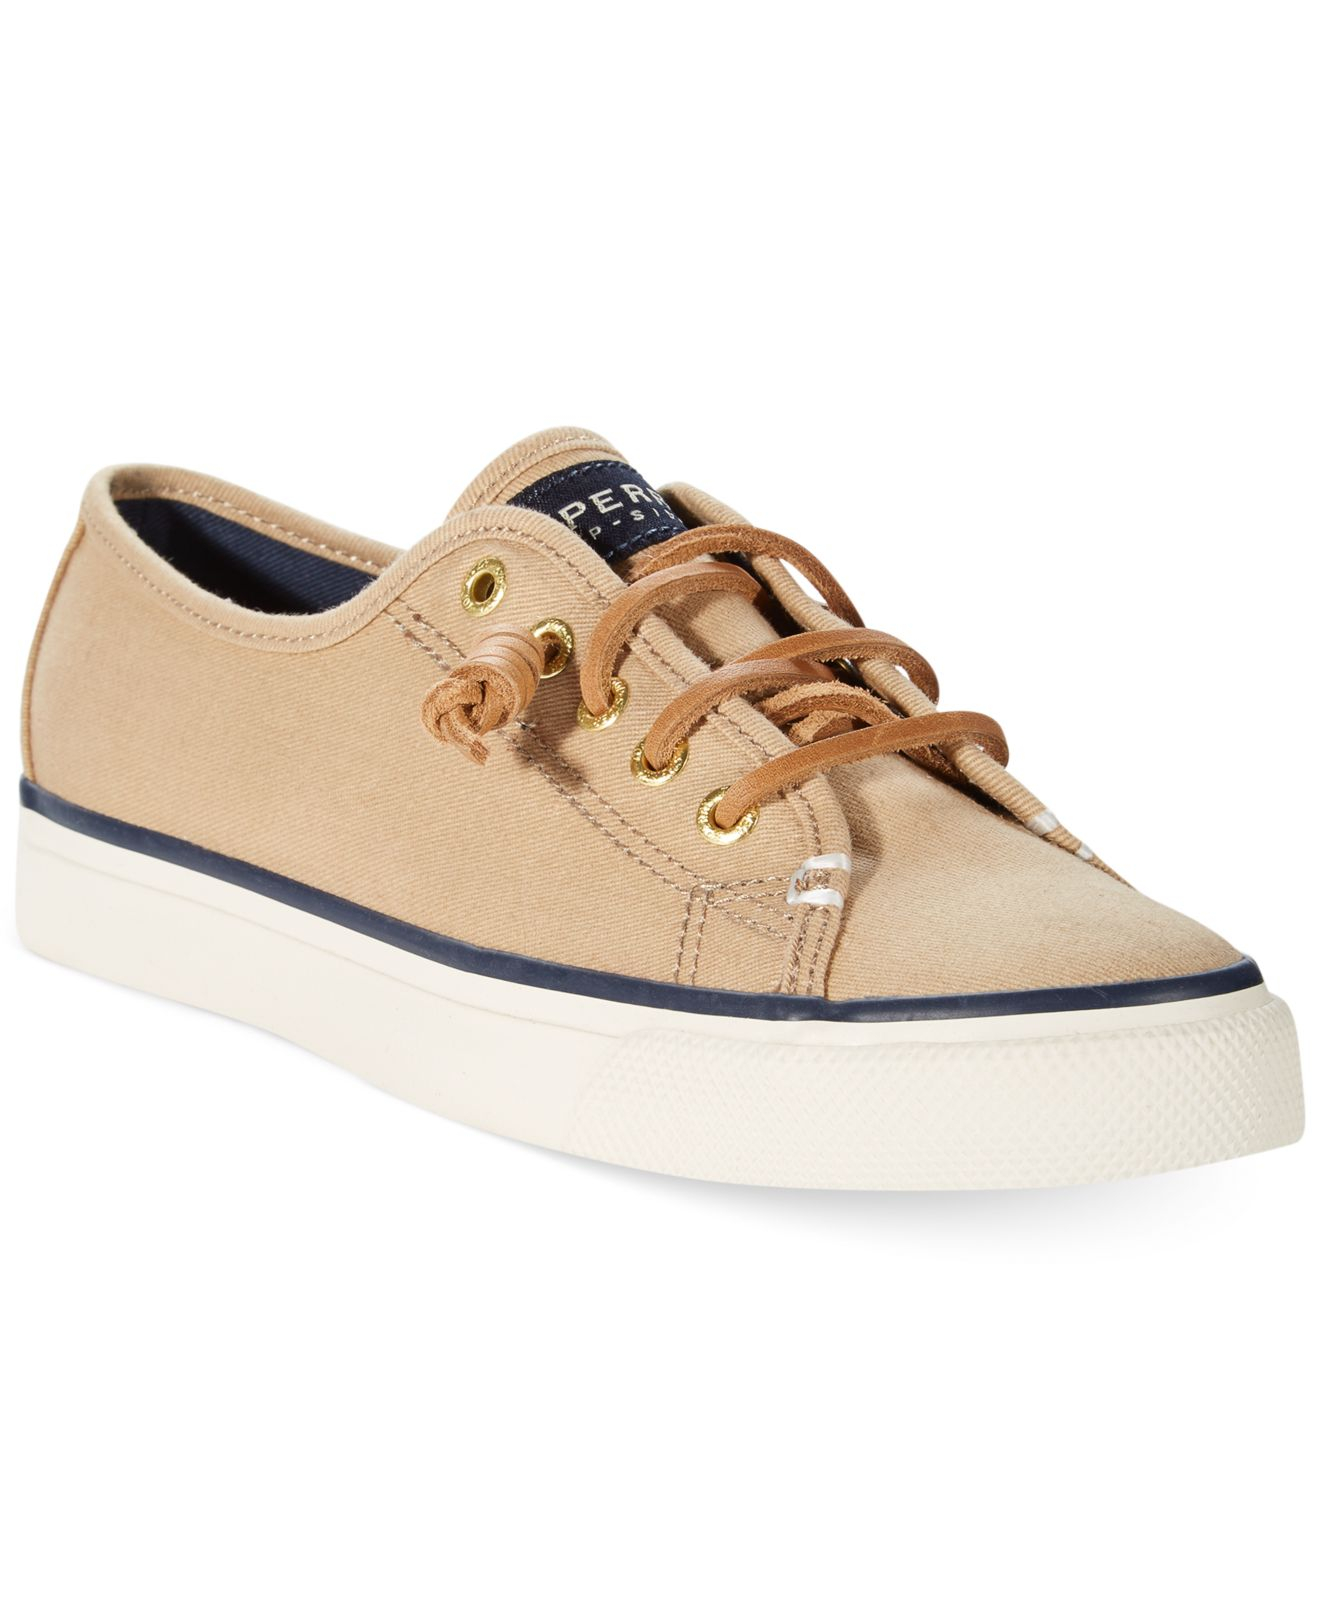 Lyst - Sperry Top-Sider Sperry Women'S Seacoast Canvas Sneakers in Natural